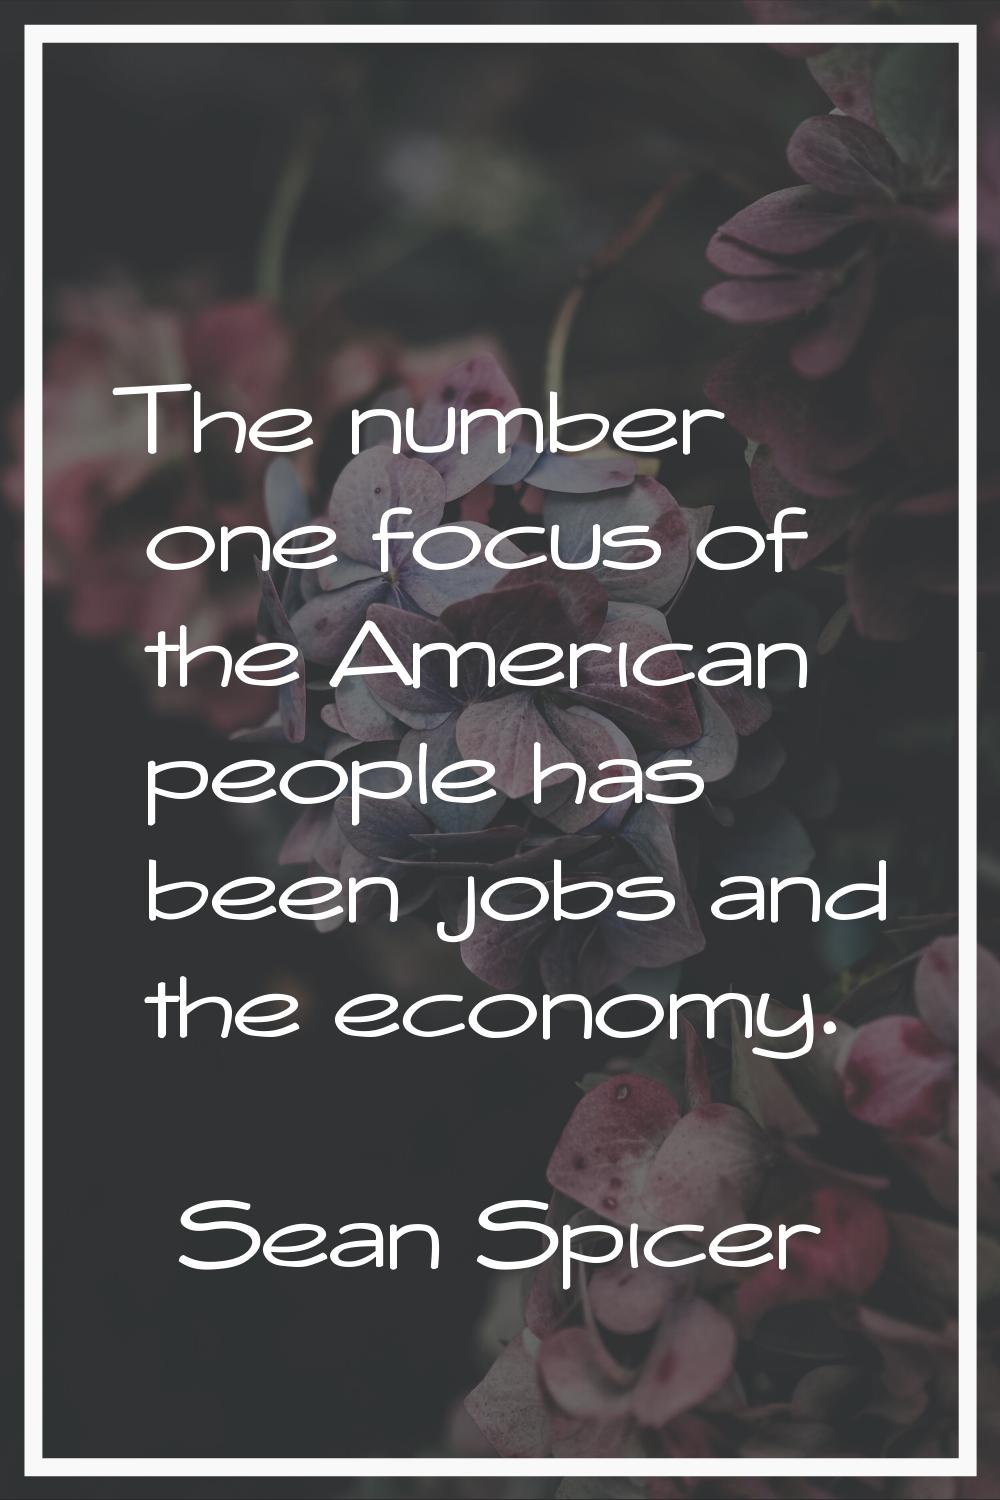 The number one focus of the American people has been jobs and the economy.